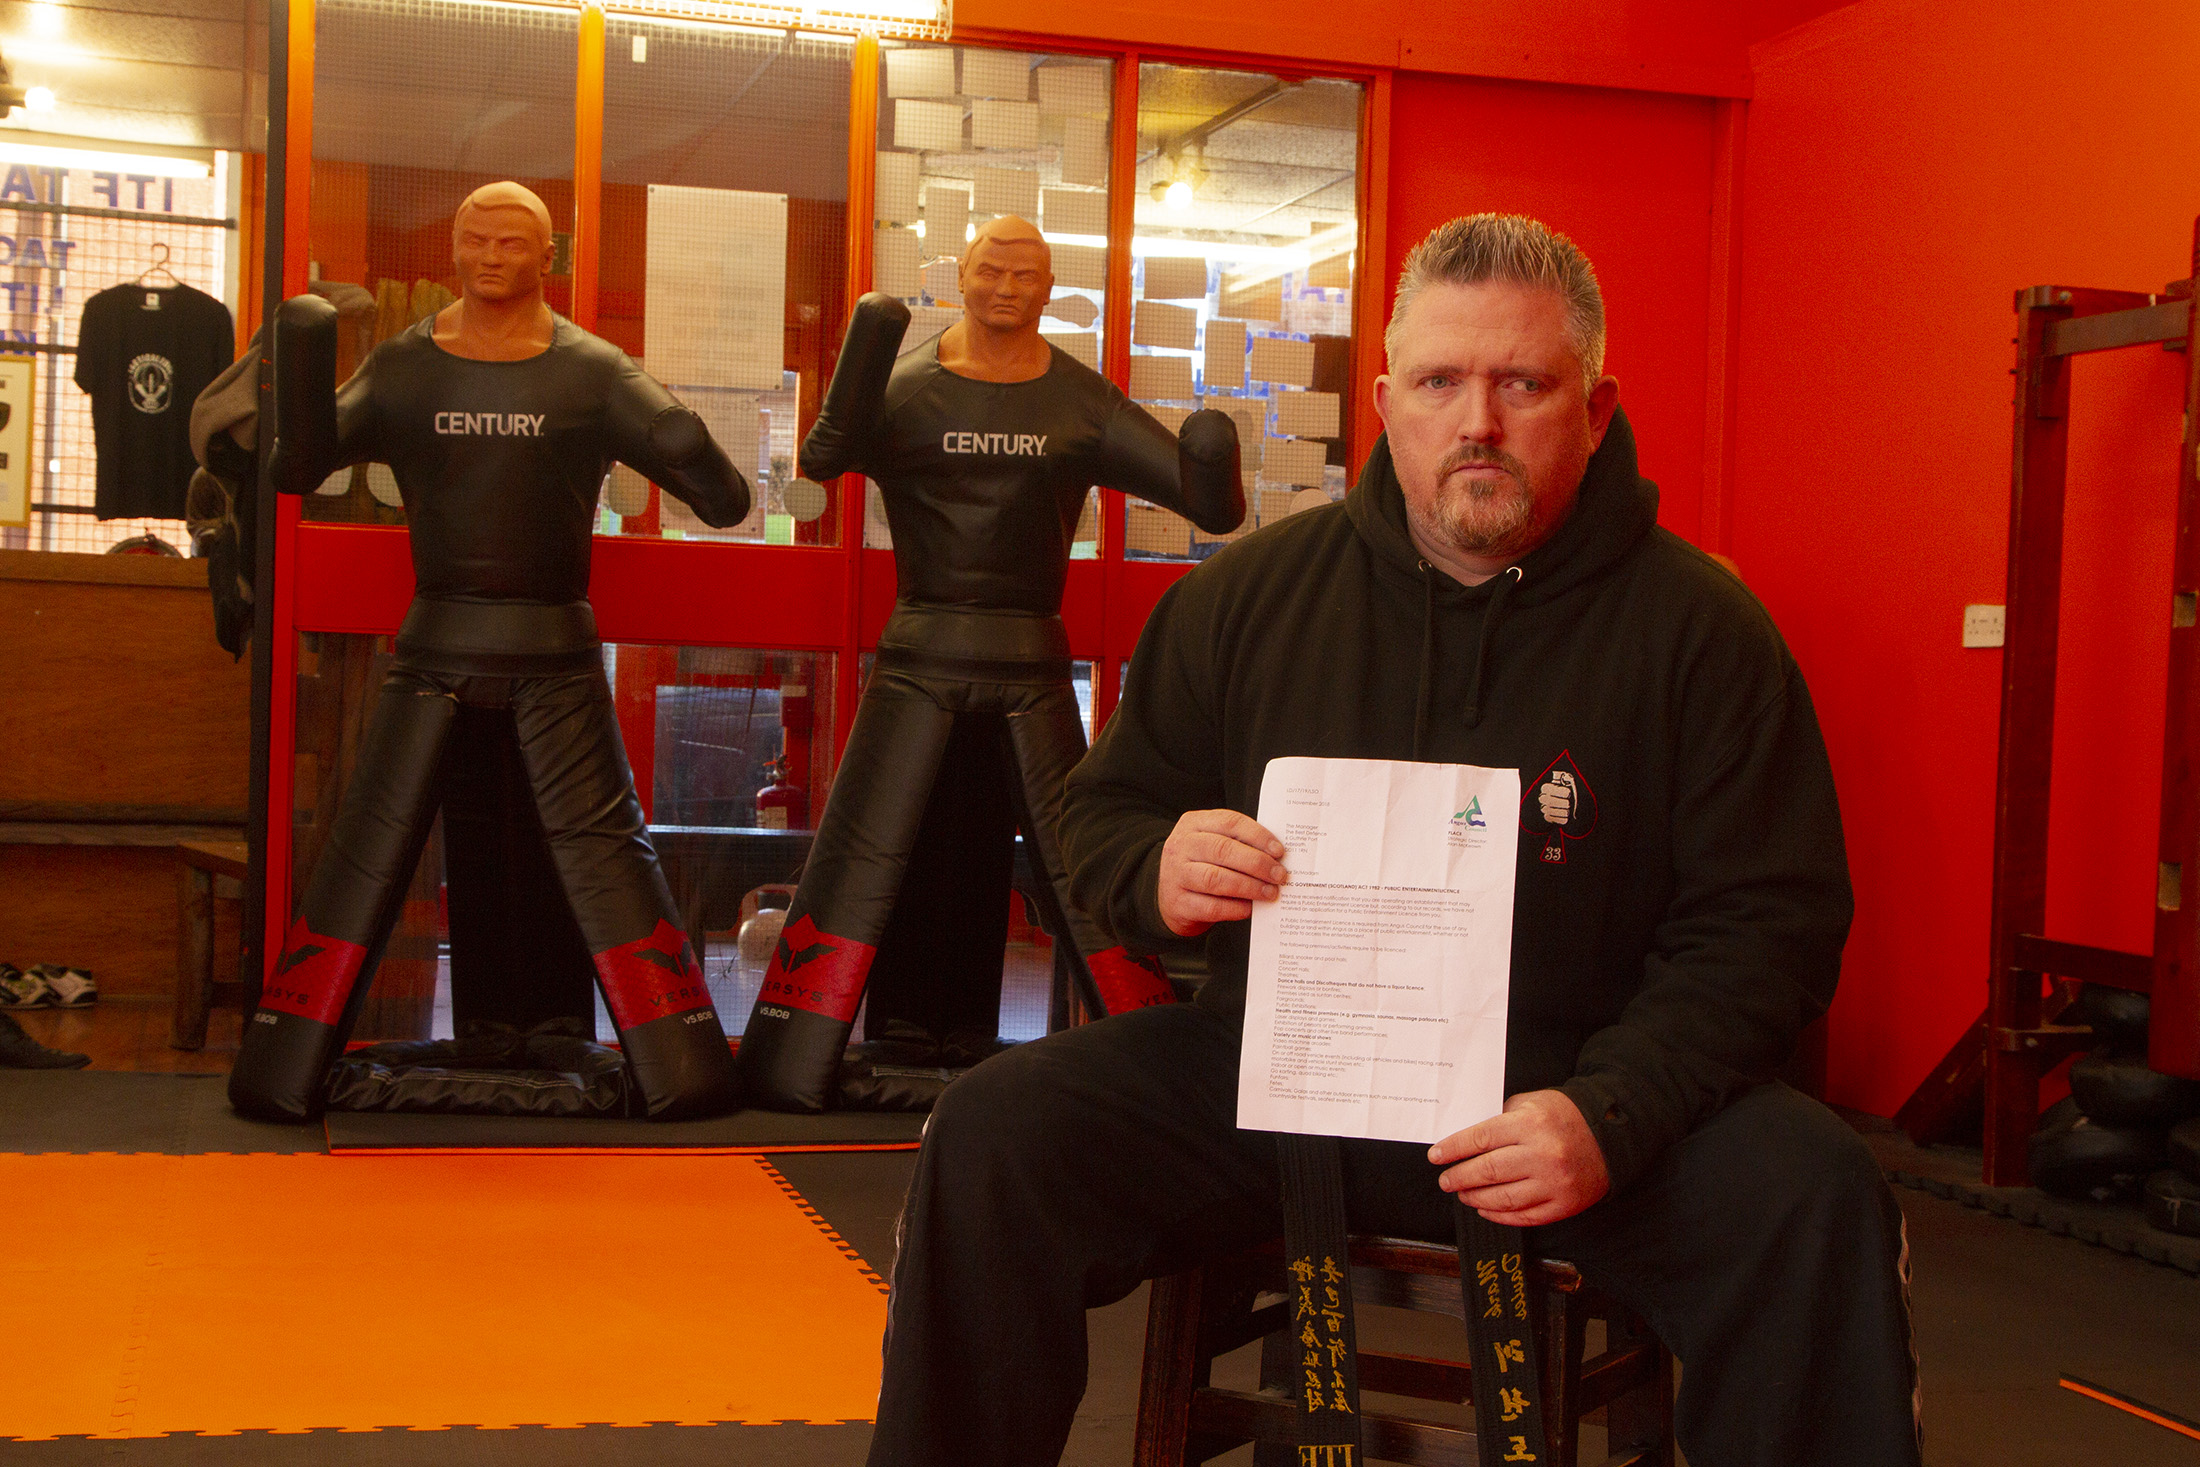 Mark Davies runs The Best Defence martial arts centre in Arbroath